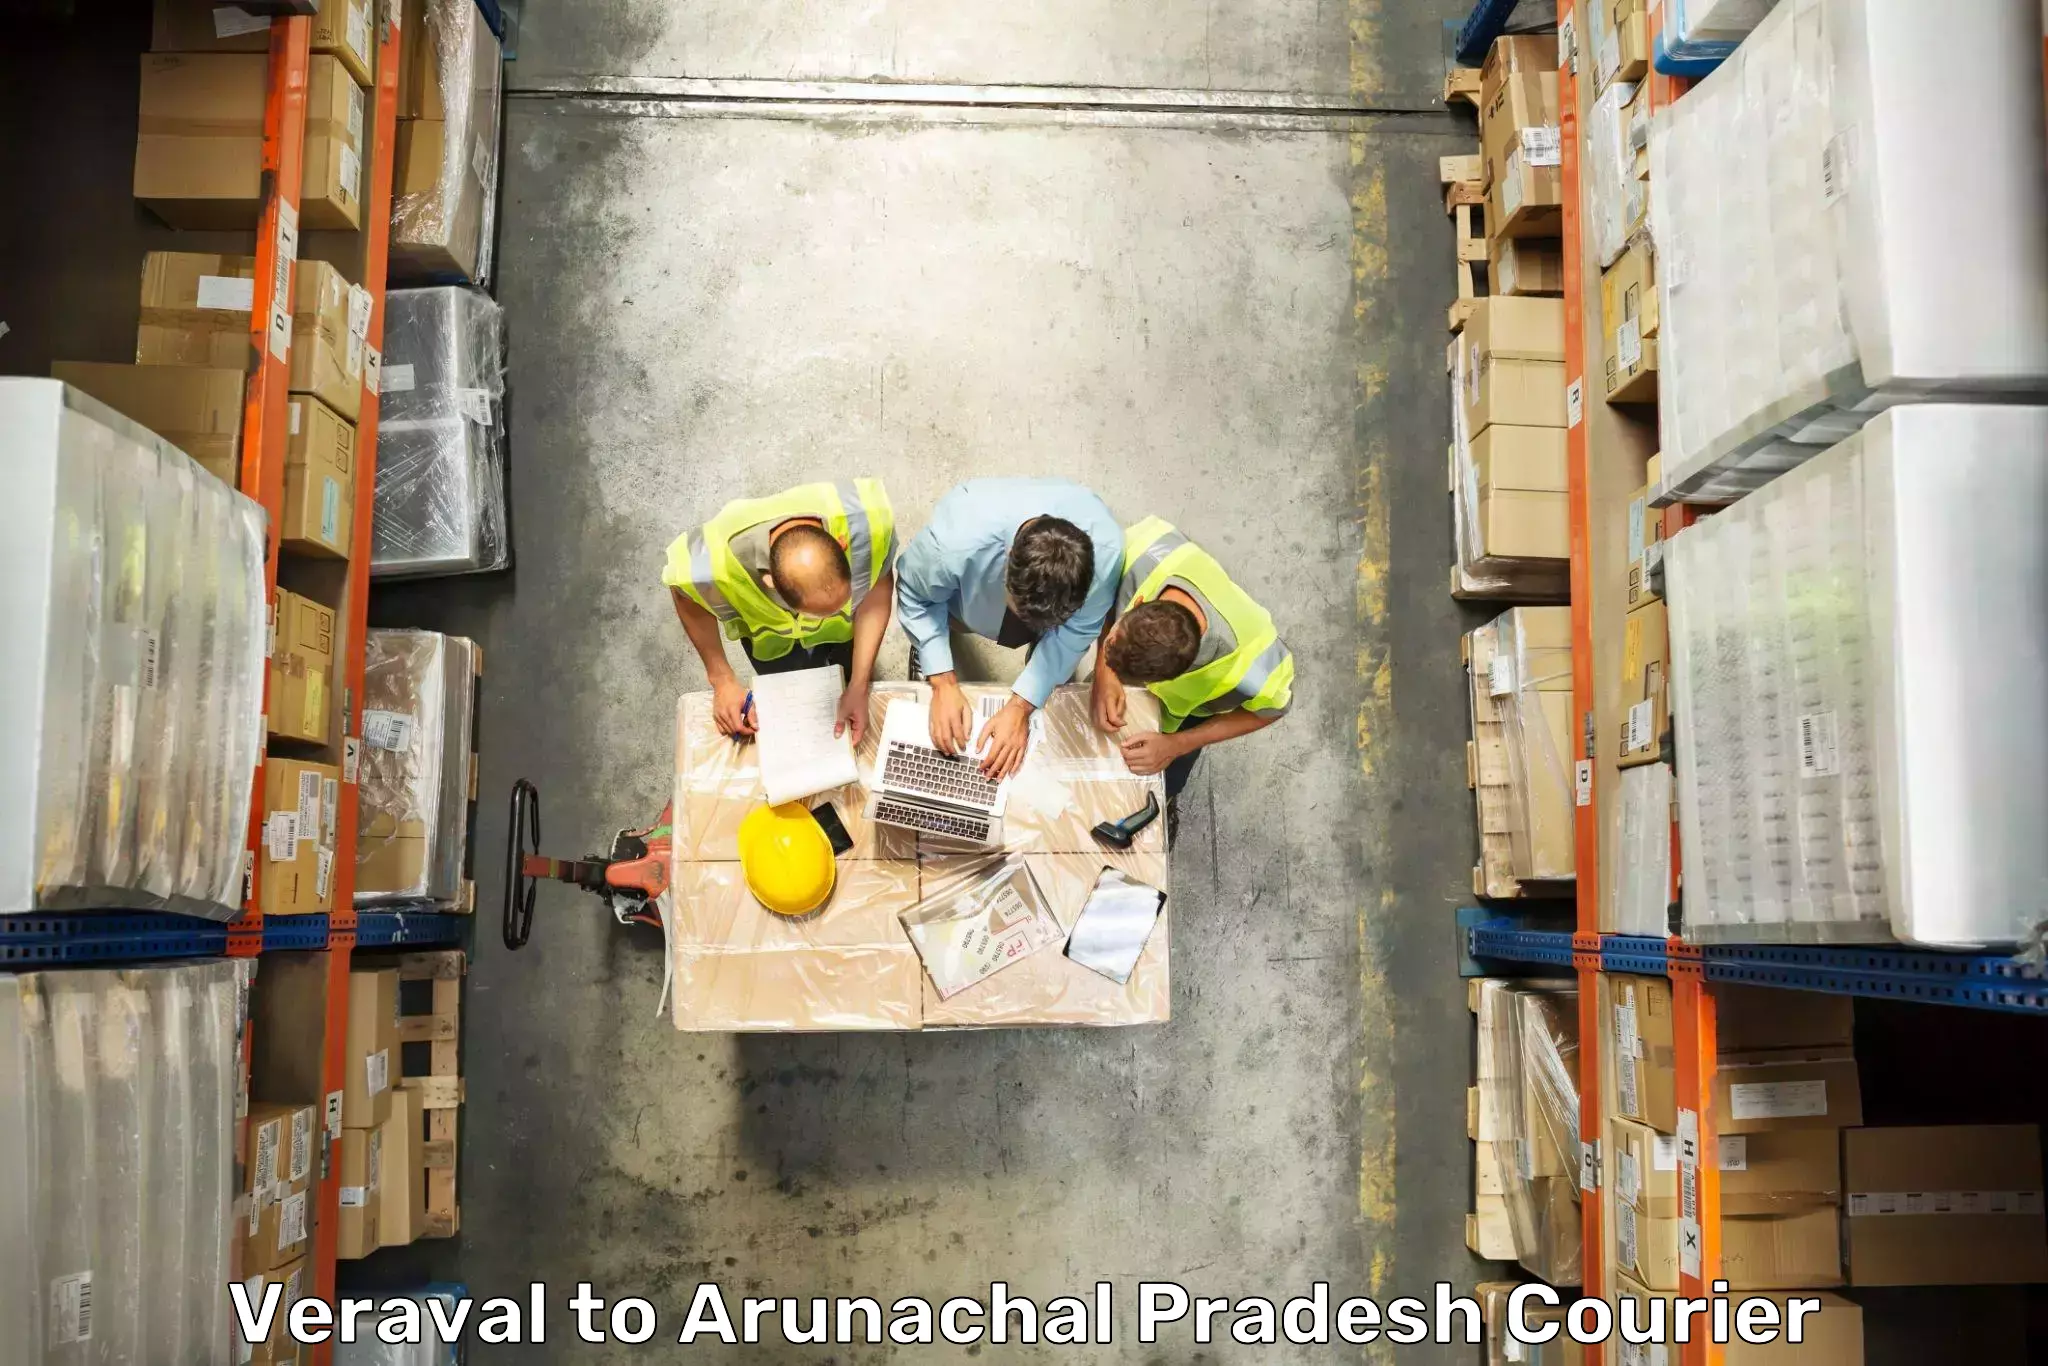 Luggage shipment specialists Veraval to Lohit